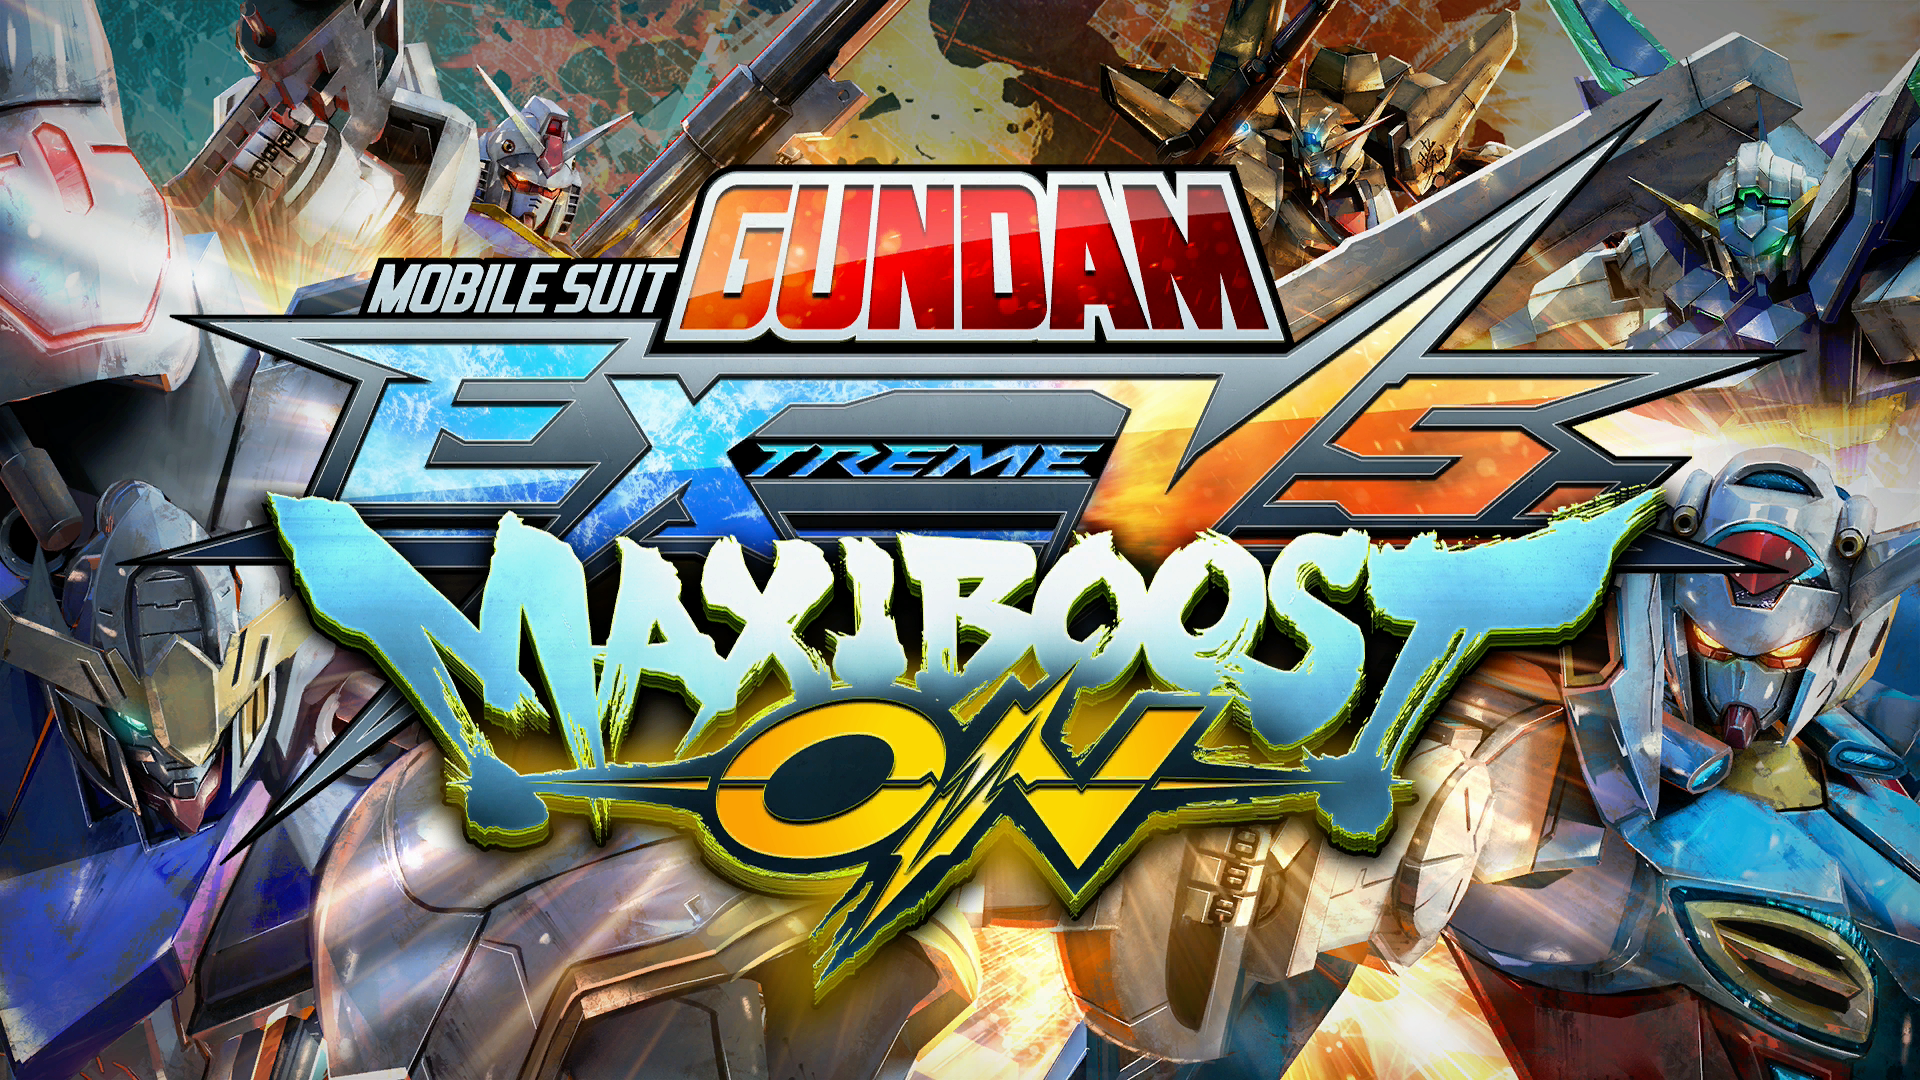 Mobile Suit Gundam Extreme Vs Maxi Boost On Review Just Push Start